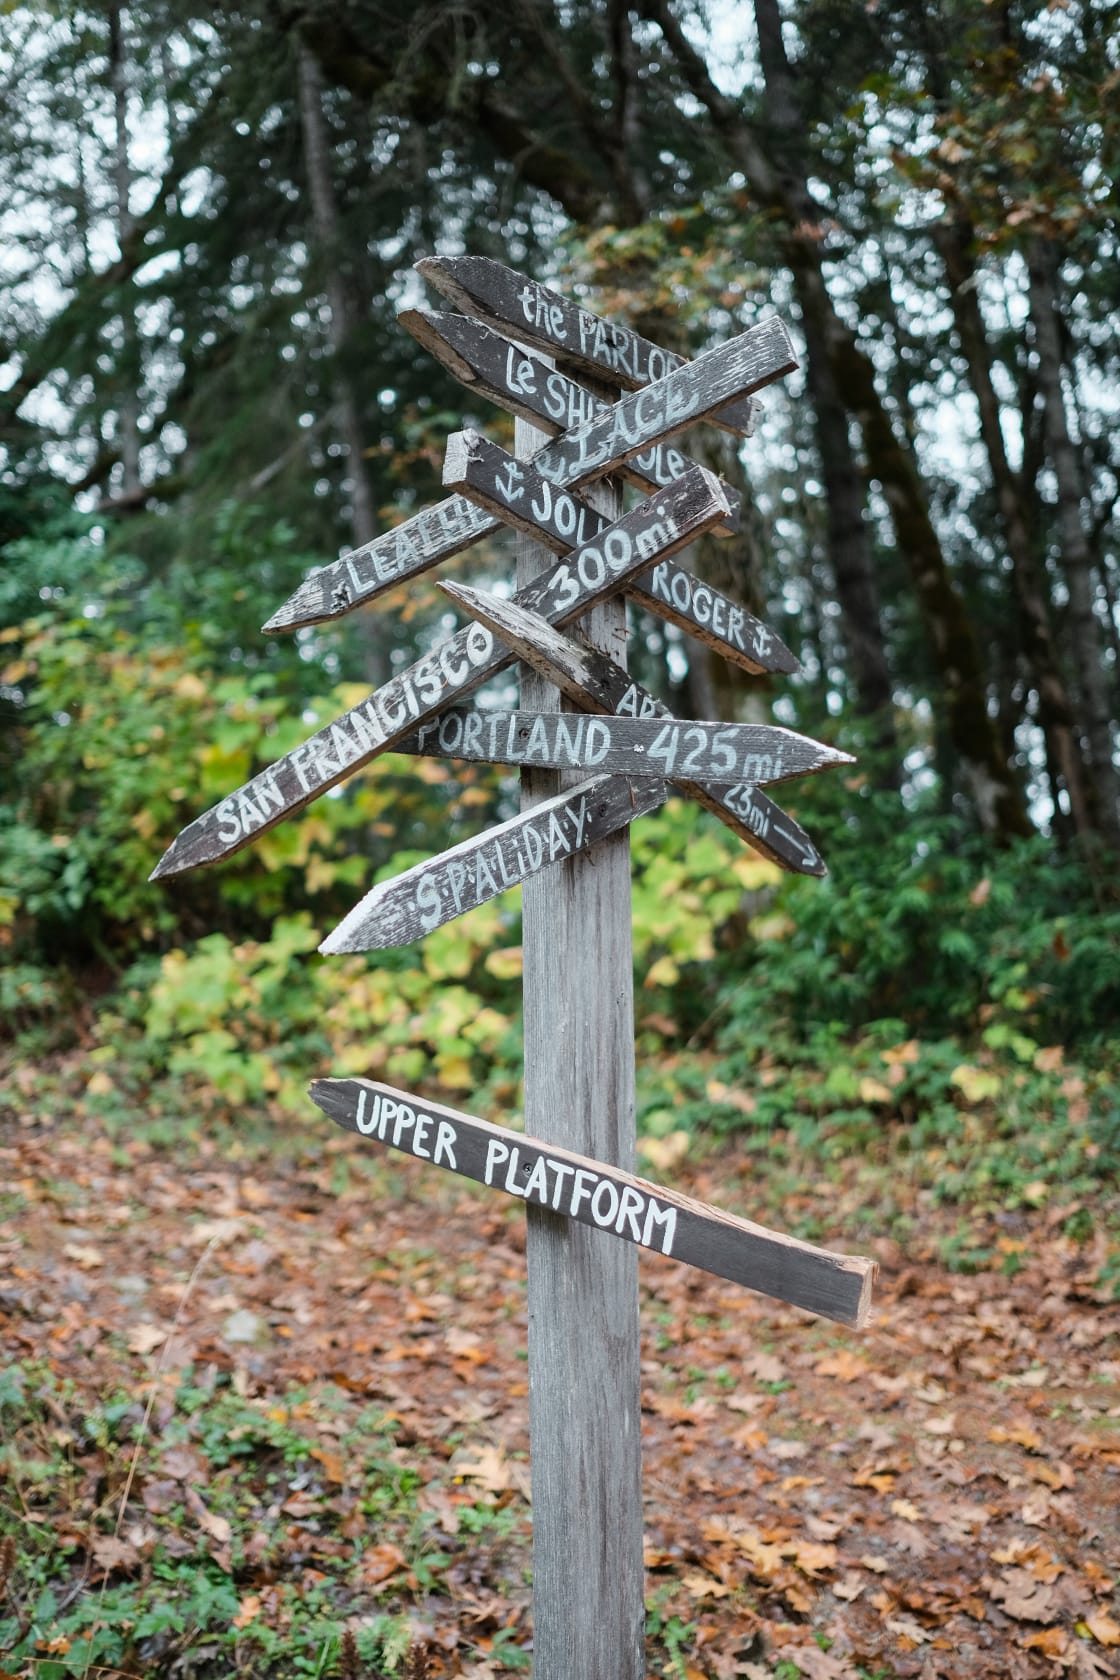 The sign with directions for the property features.